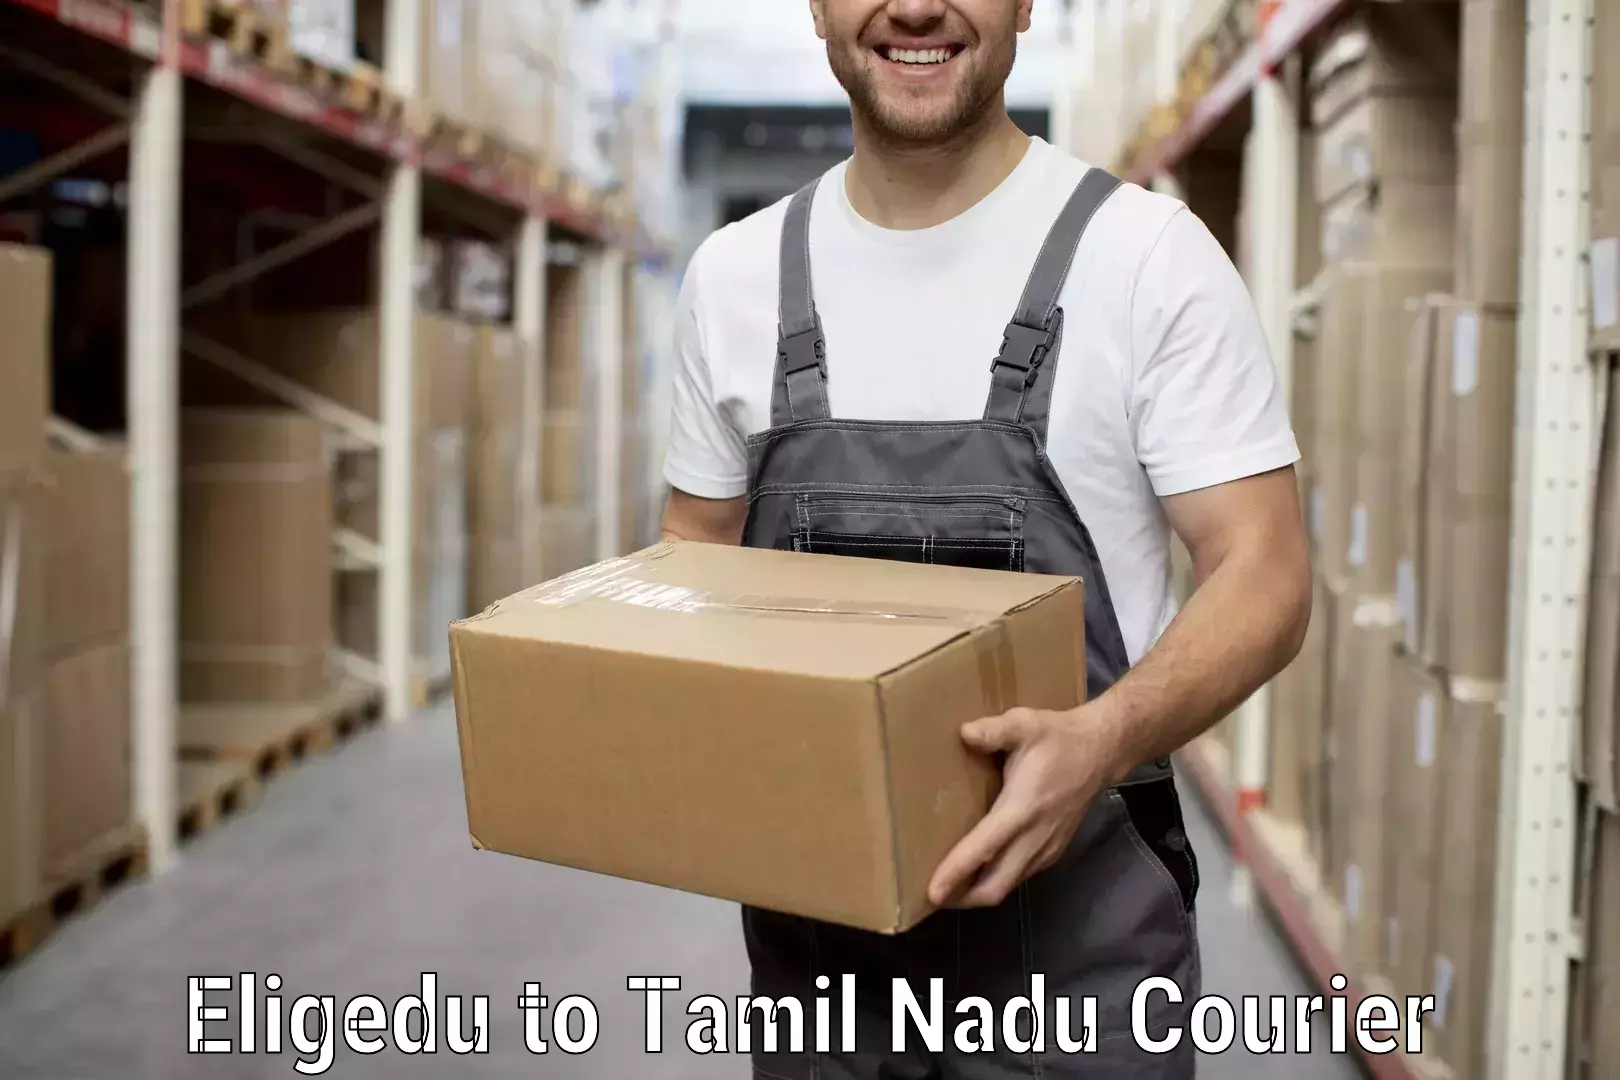 Furniture transport specialists Eligedu to Papanasam